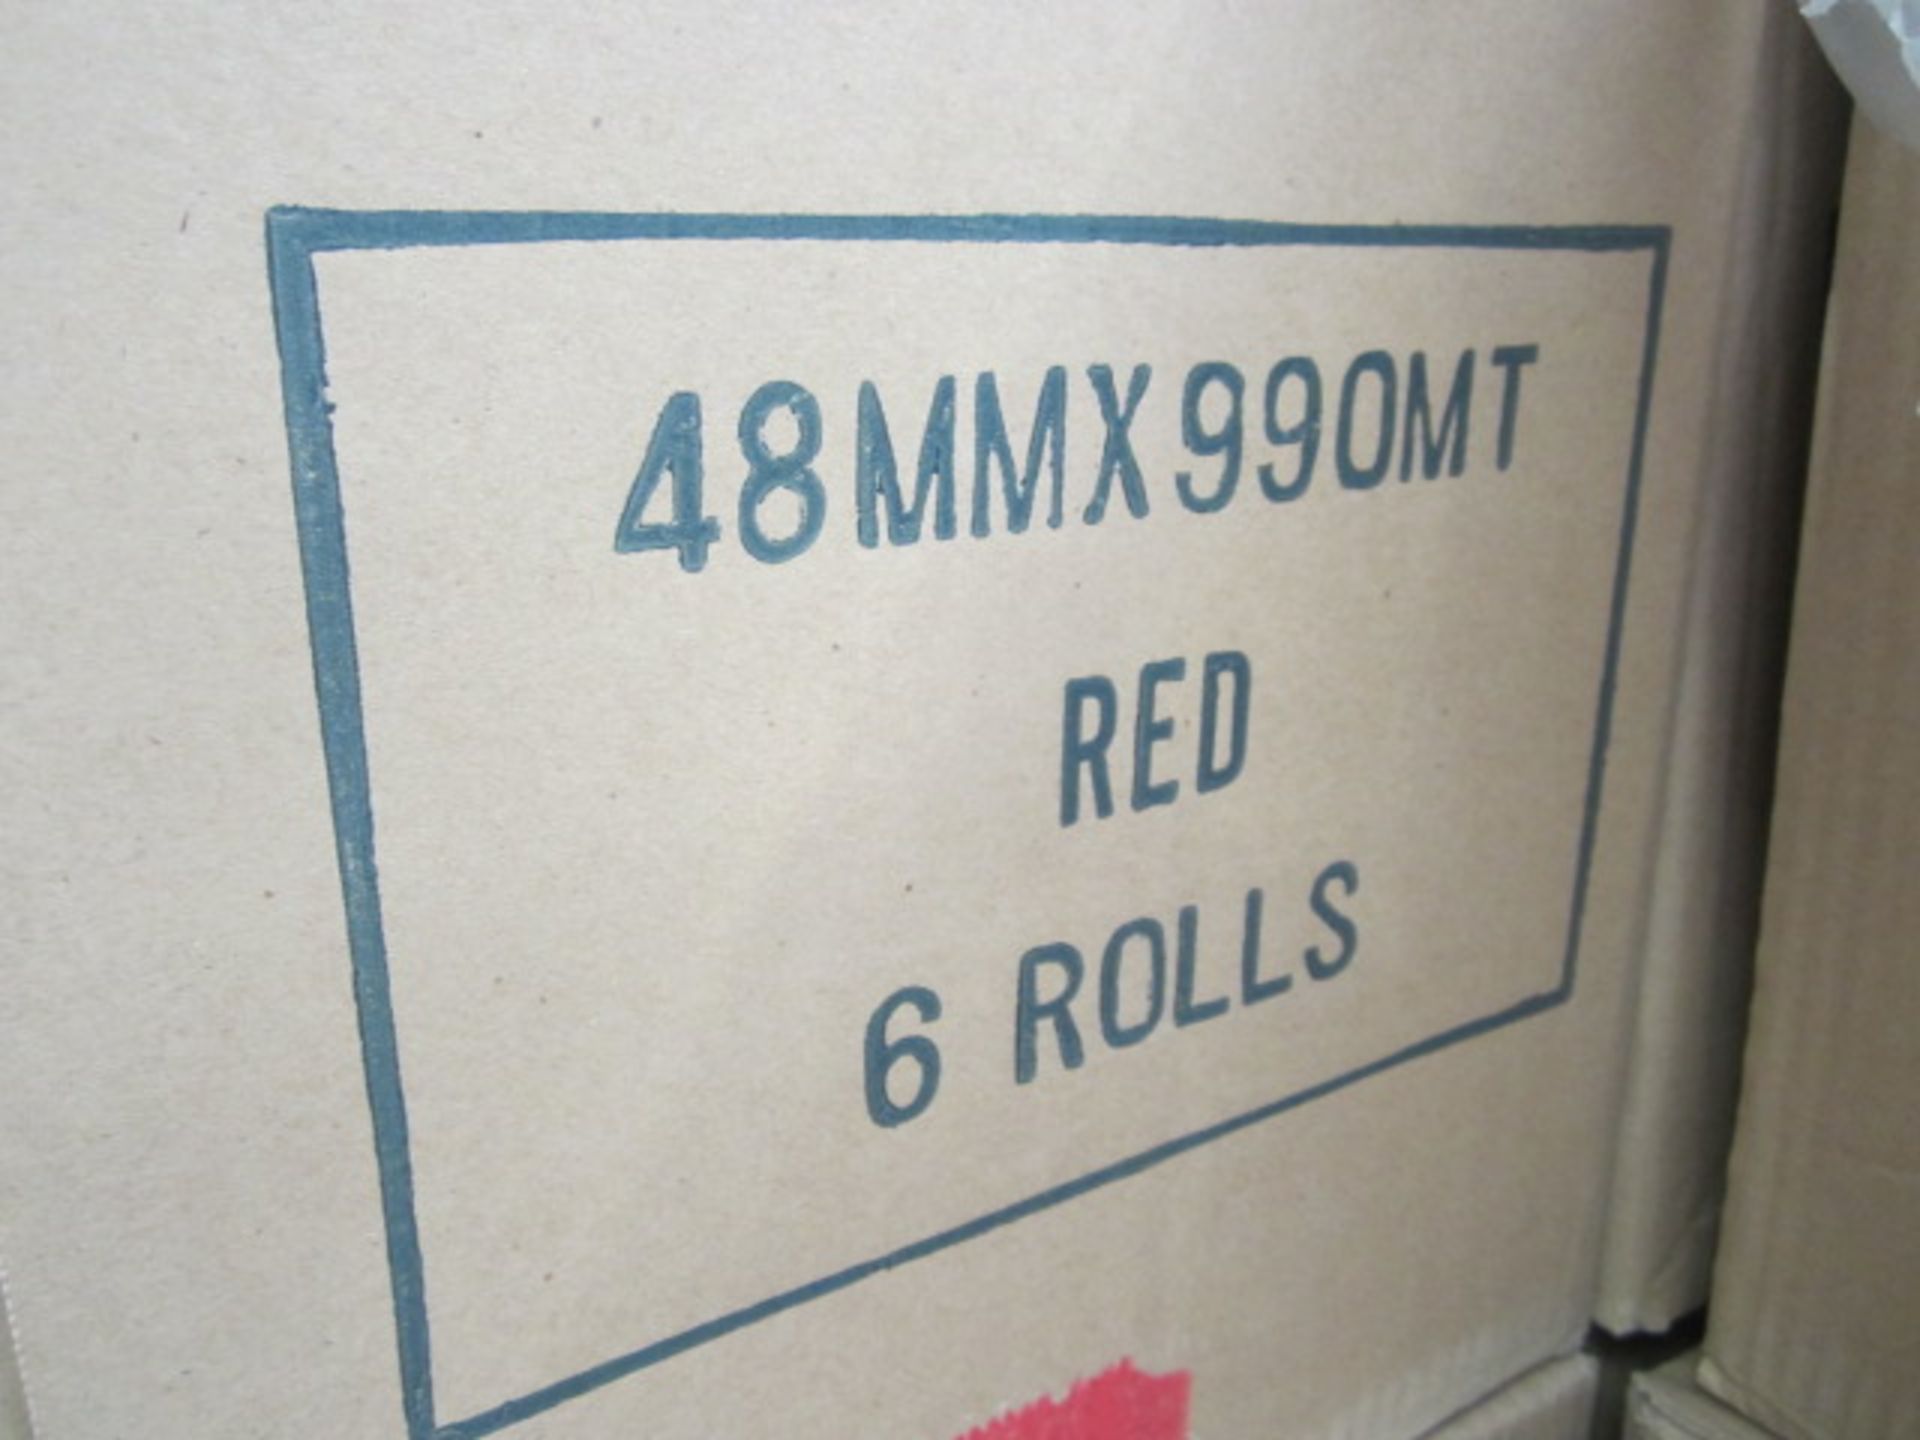 Approximately 43 boxes PM89 red tape, 48mm x 990m, 6 rolls per box Located: Kingsditch Lane, - Image 4 of 4